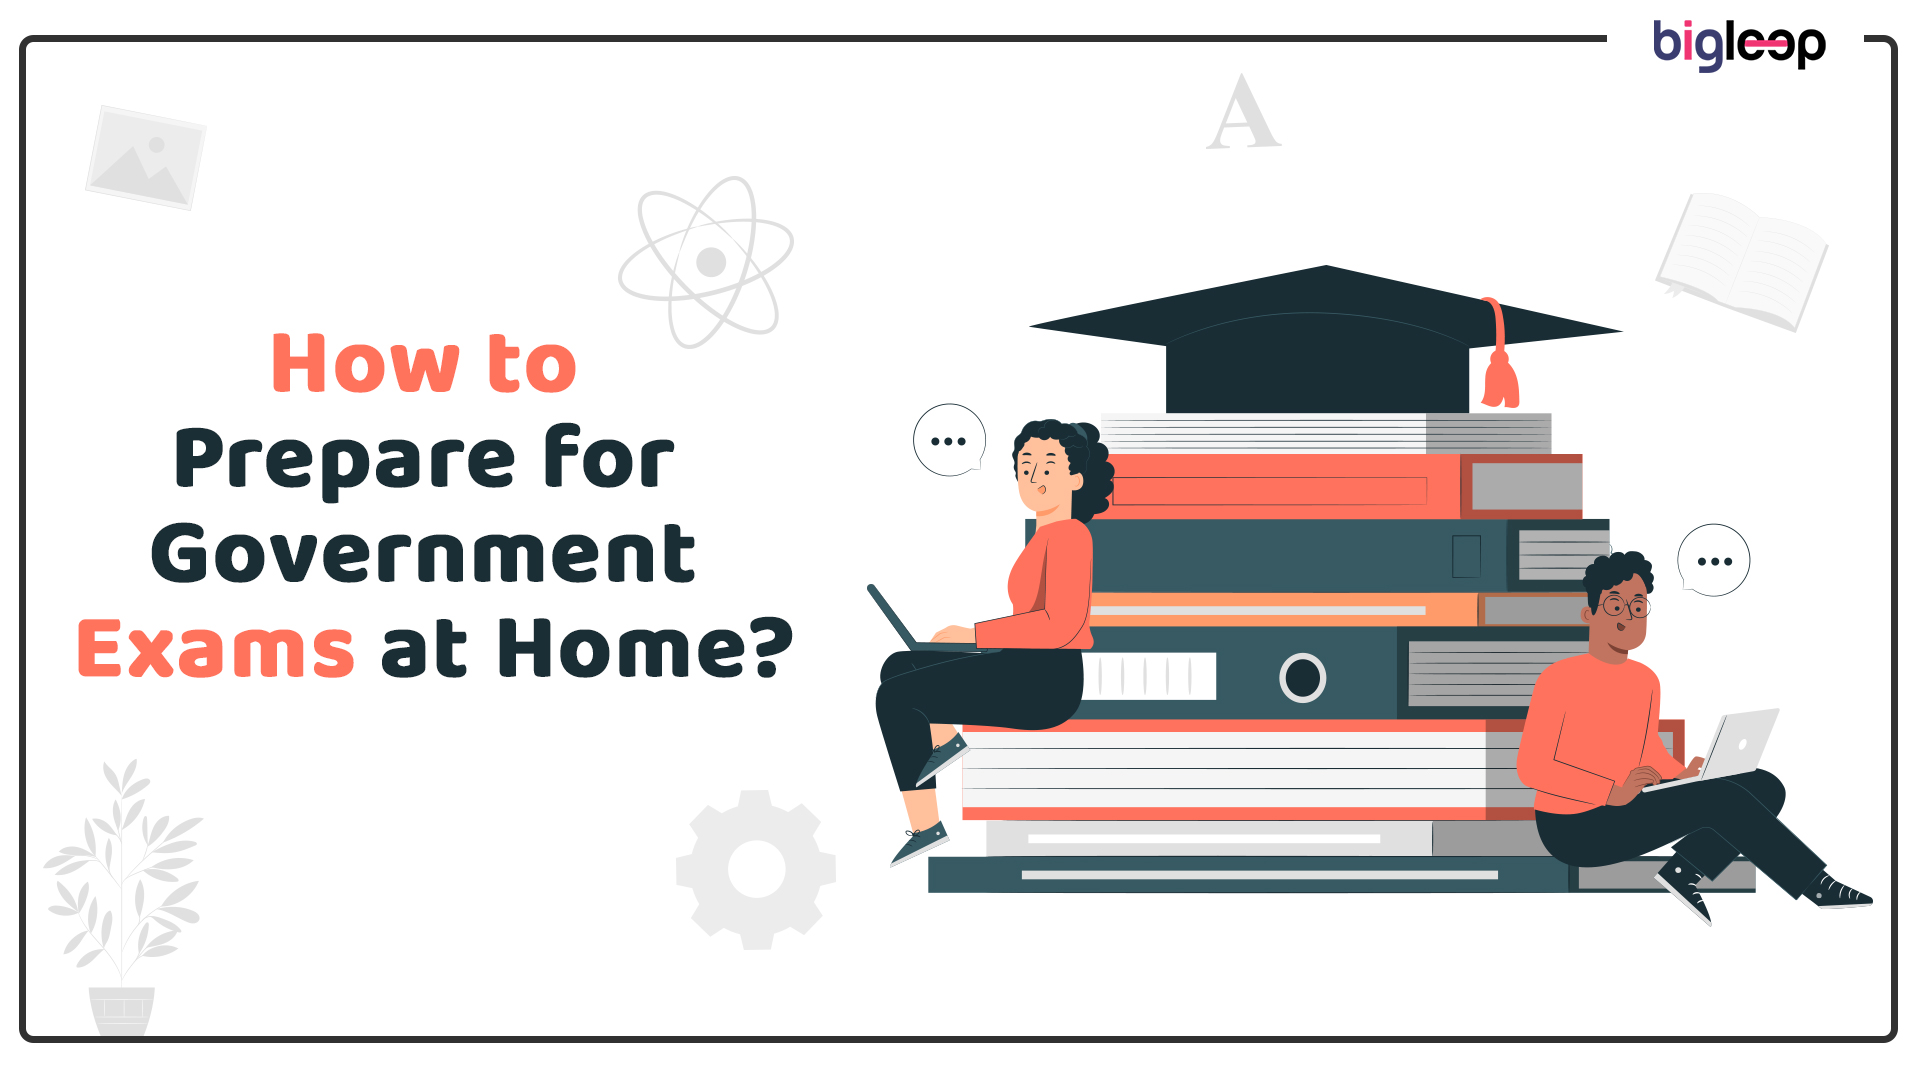 How to Prepare for Government Exams at Home?